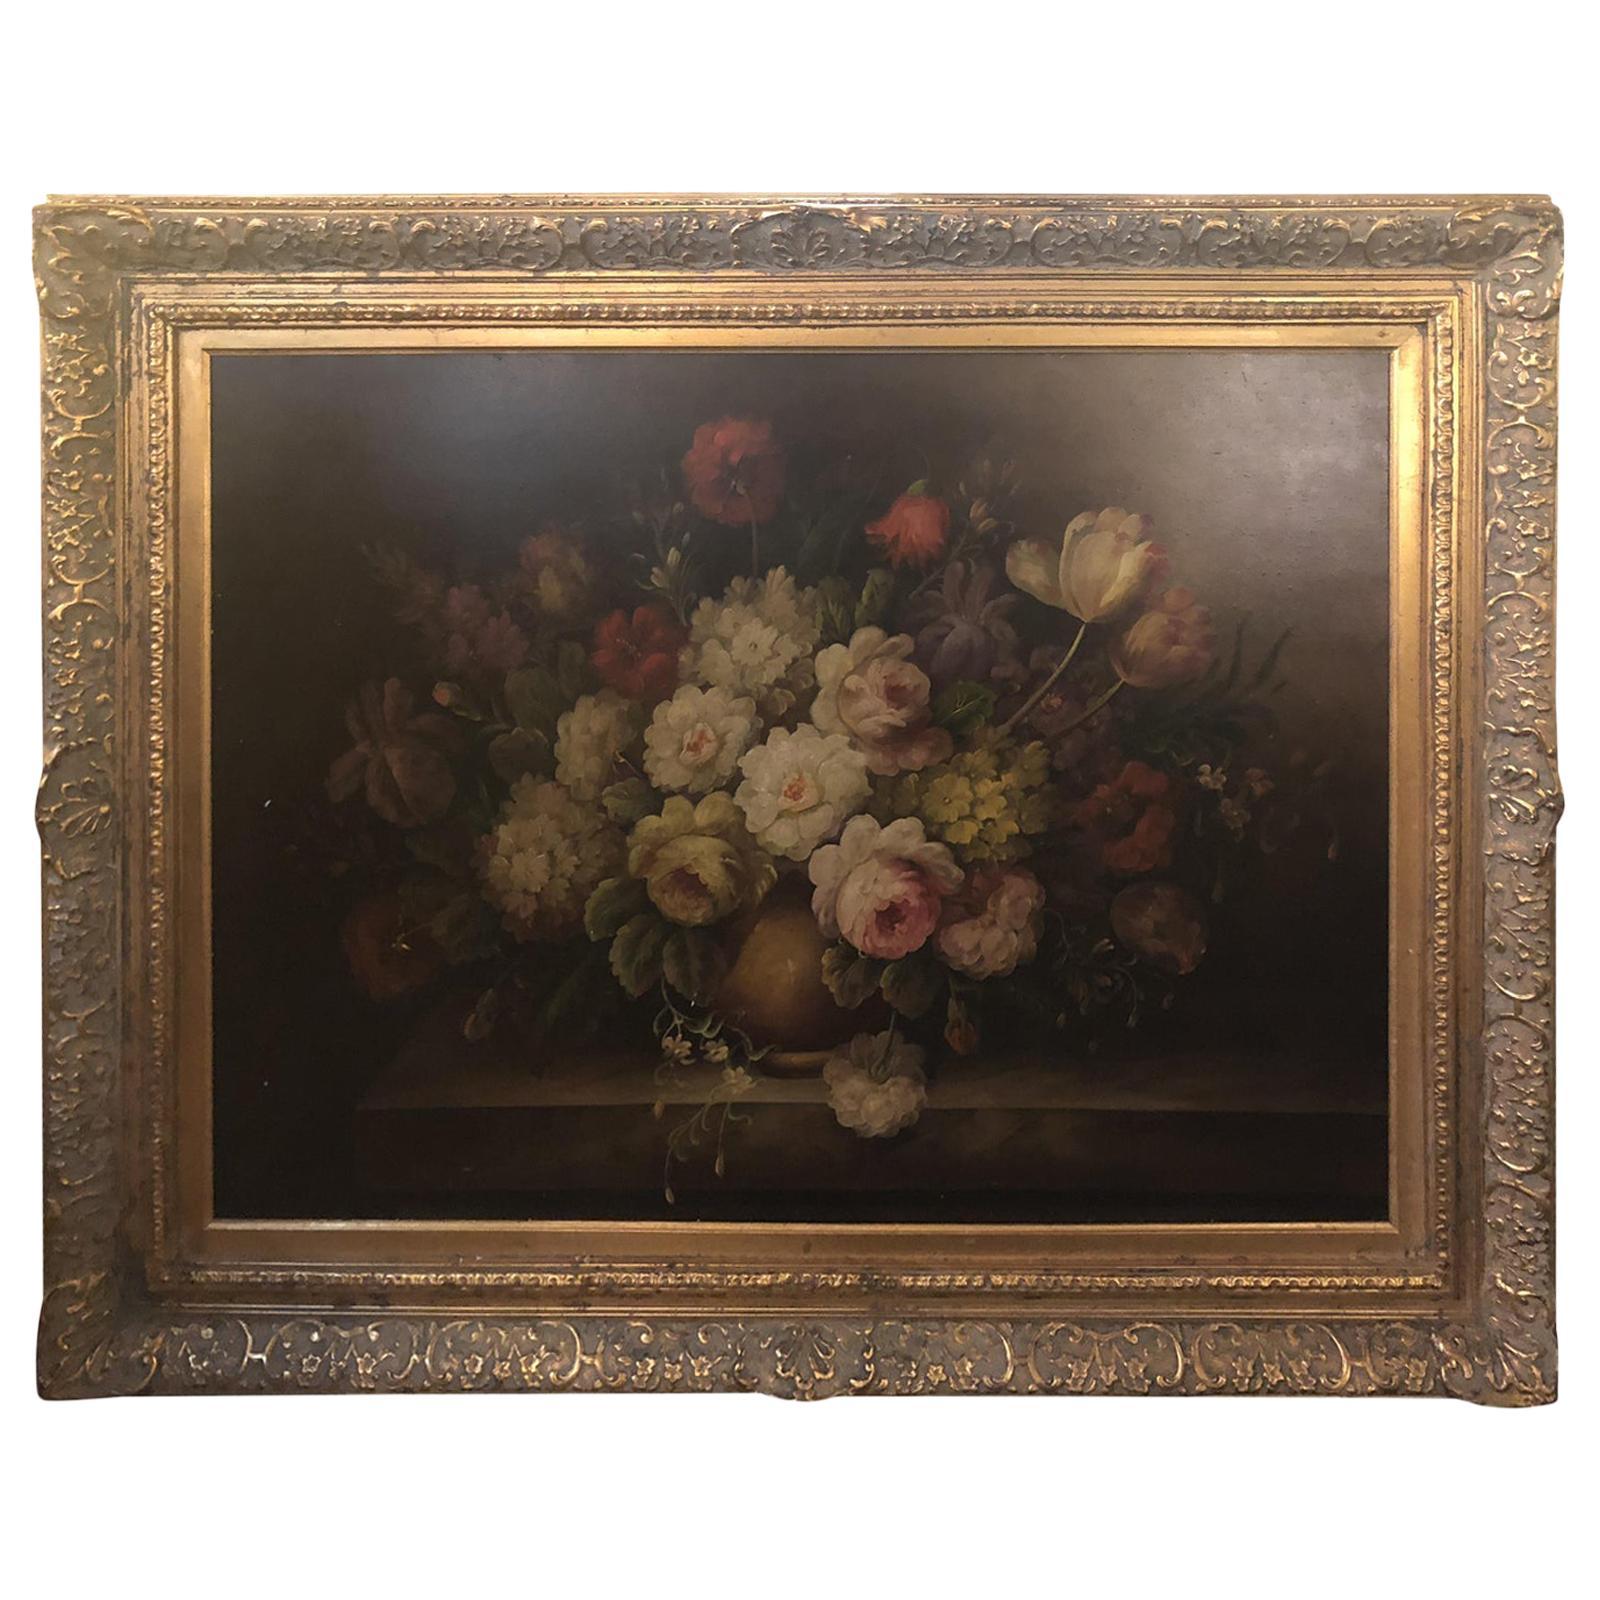 1980s oil on canvas flower vase still life painting

A  stunning large  still life oil on canvas painting of monumental flowers vase after Roger Godchaux ( French, 1878- 1958). The painting features an antique custom made gilt wood frame